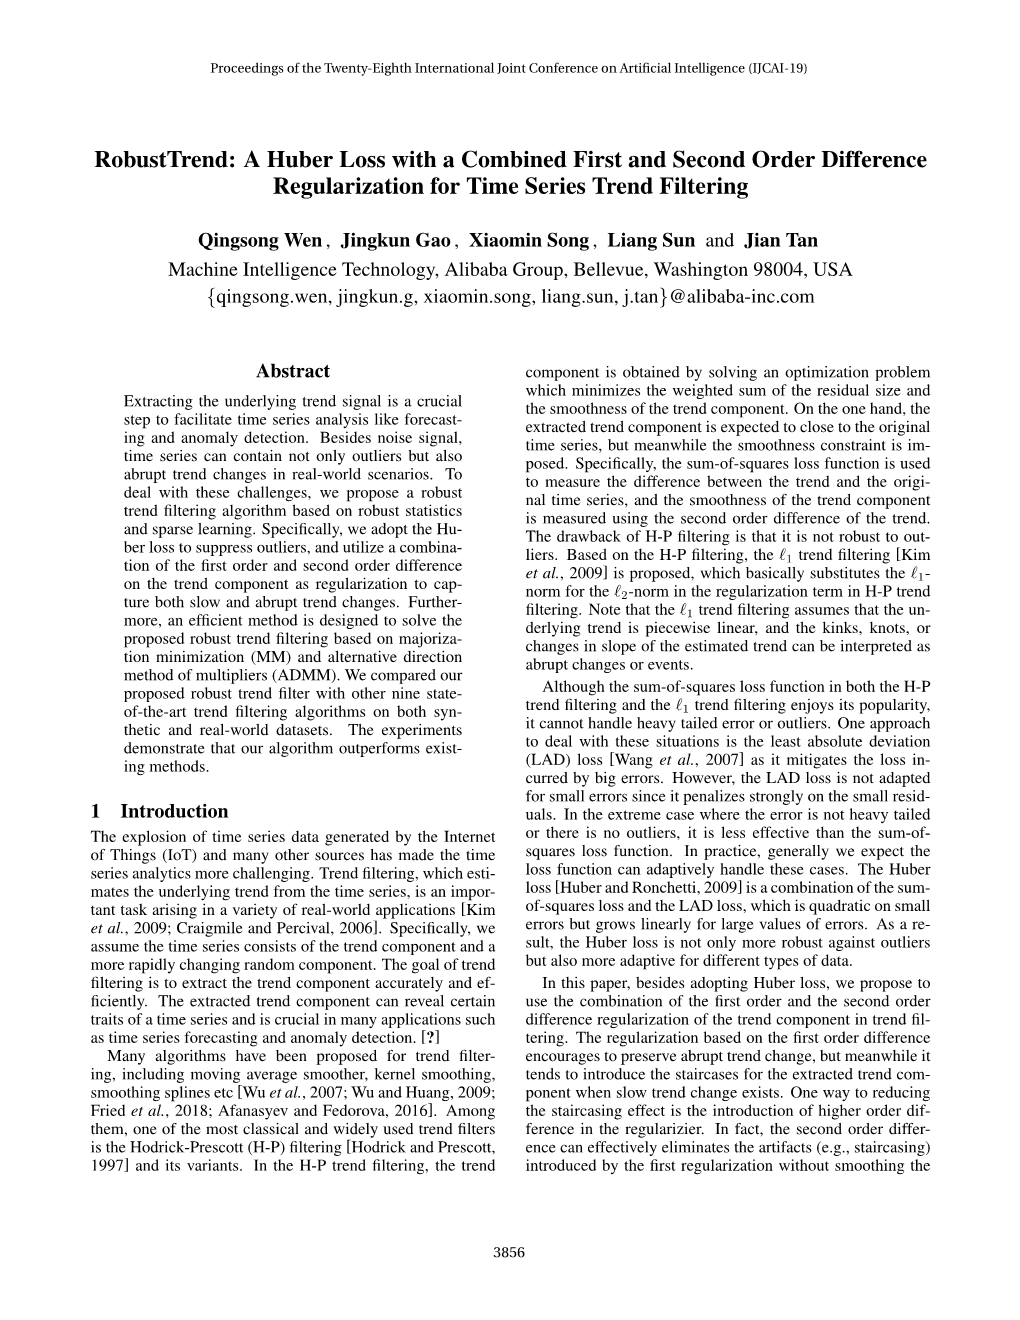 A Huber Loss with a Combined First and Second Order Difference Regularization for Time Series Trend Filtering